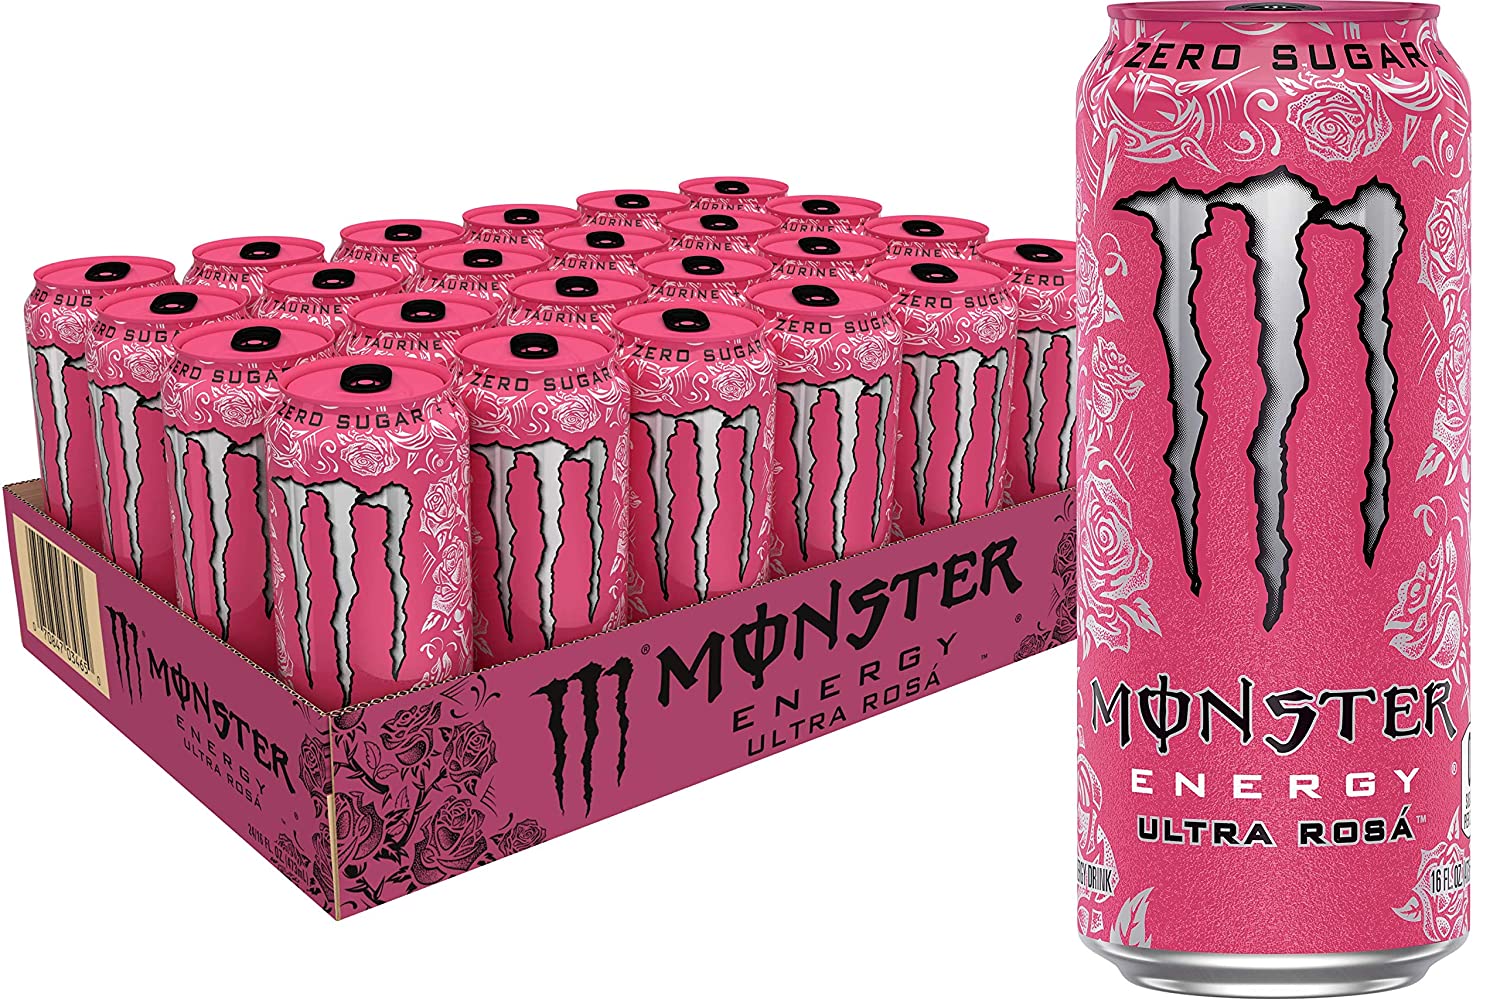 40% off first S+S -  Monster Energy Drink, 16 oz, 24 pack $15.44